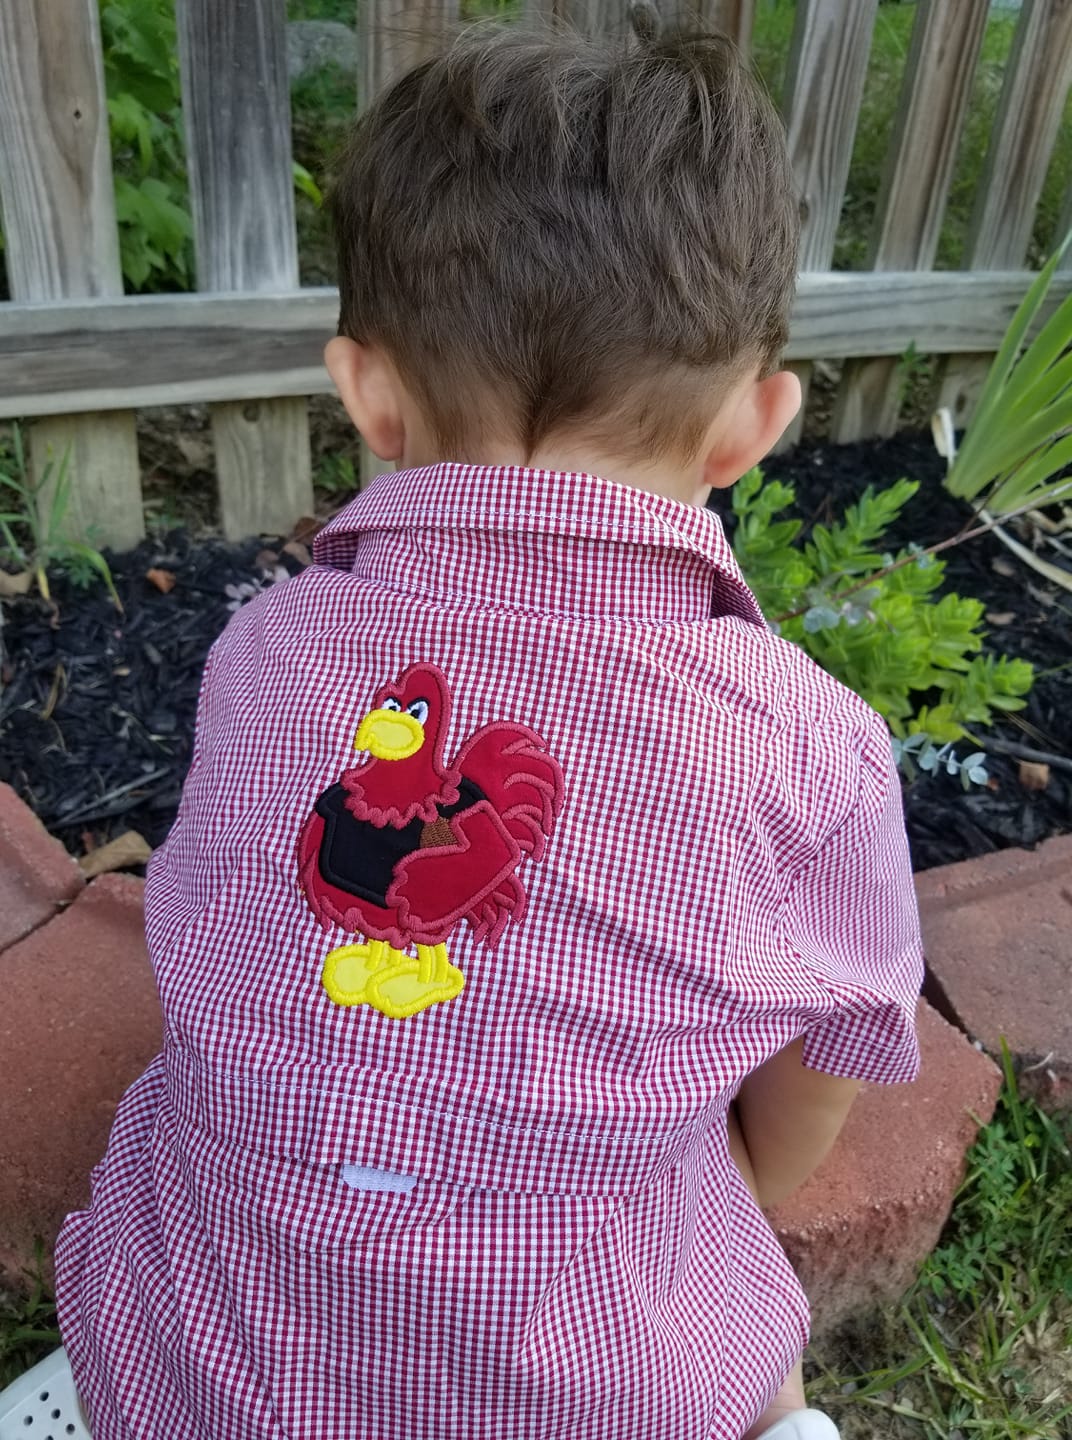 Rooster Shirt